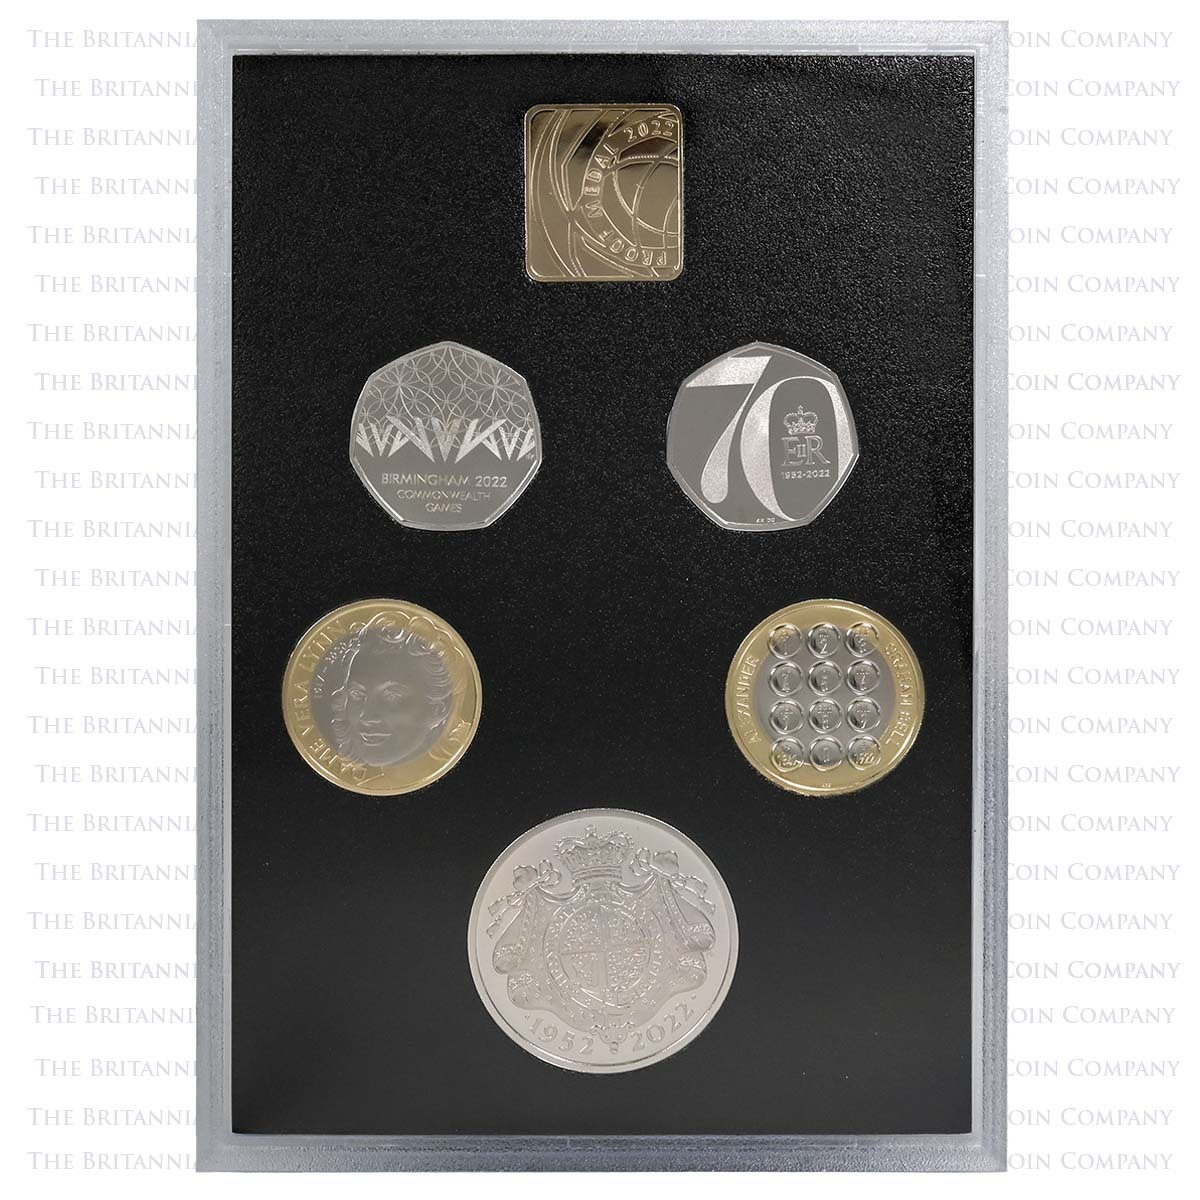 D22COLL 2022 Annual 13 Coin Collectors Proof Set Platinum Jubilee Commemorative